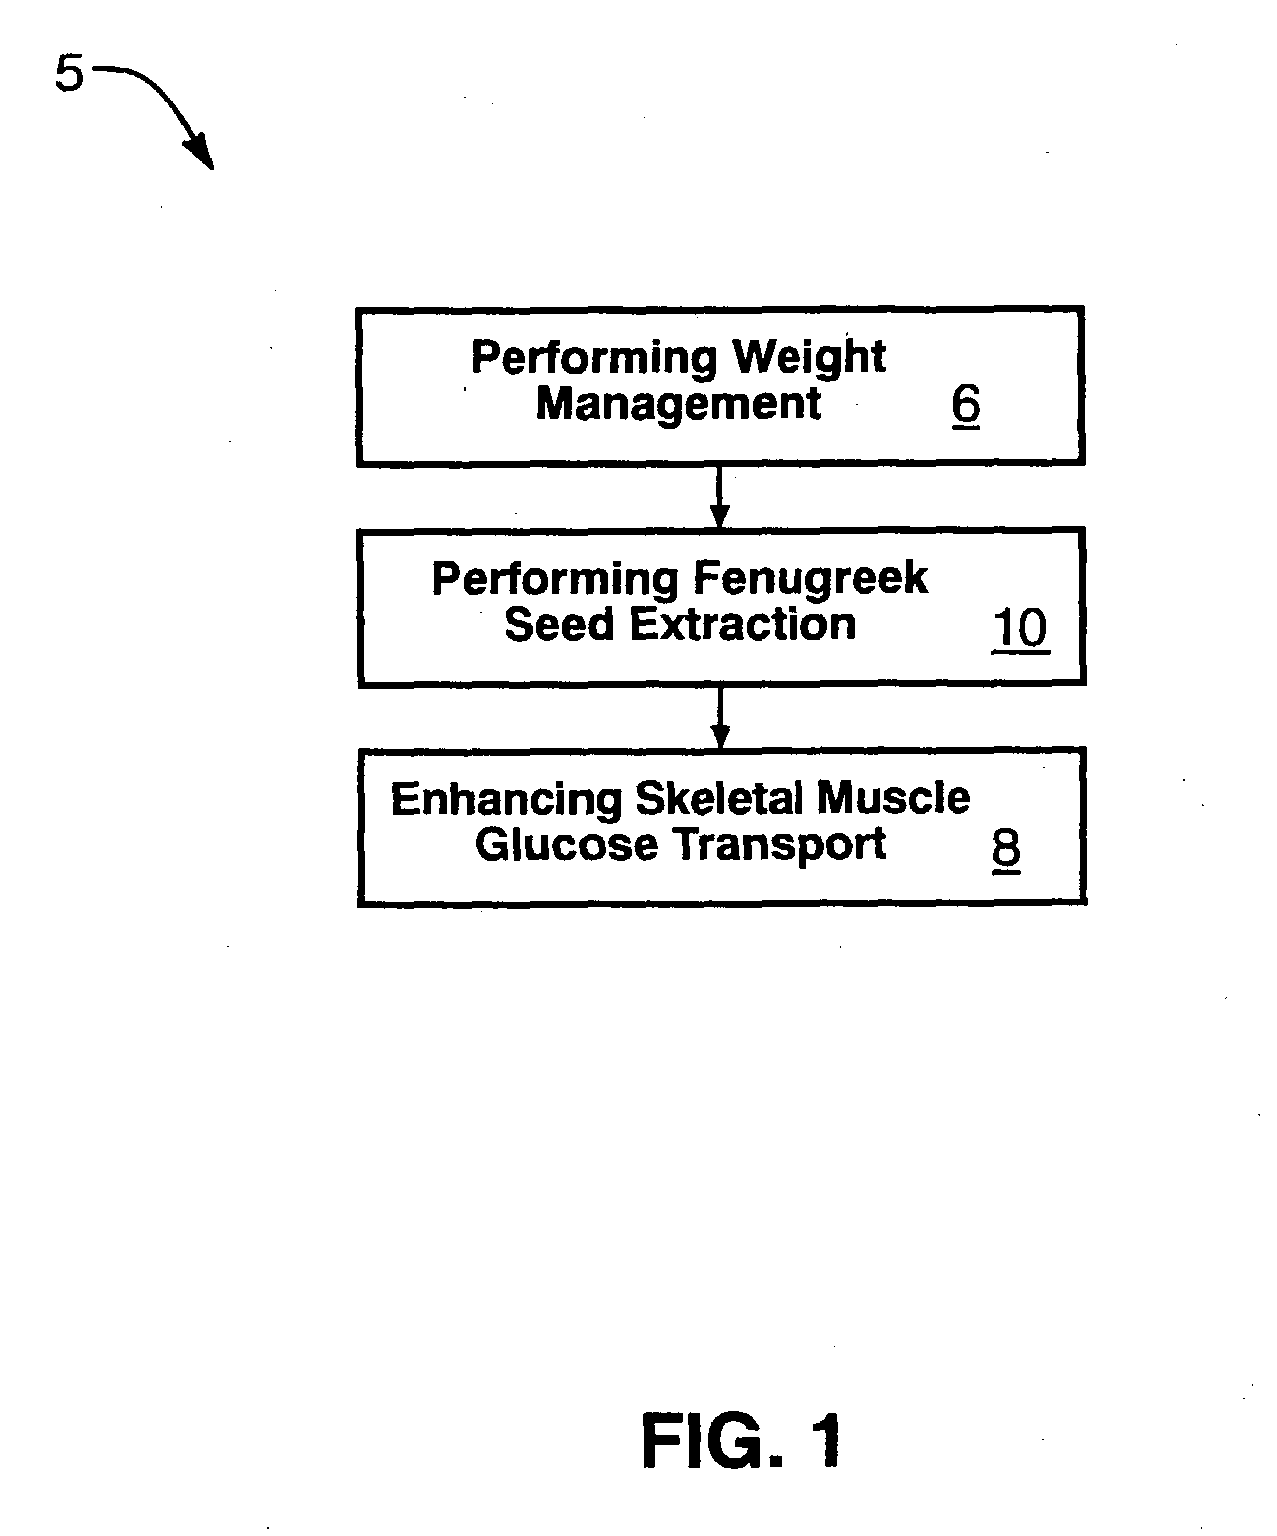 Fenugreek seed bio-active compositions and methods for extracting same